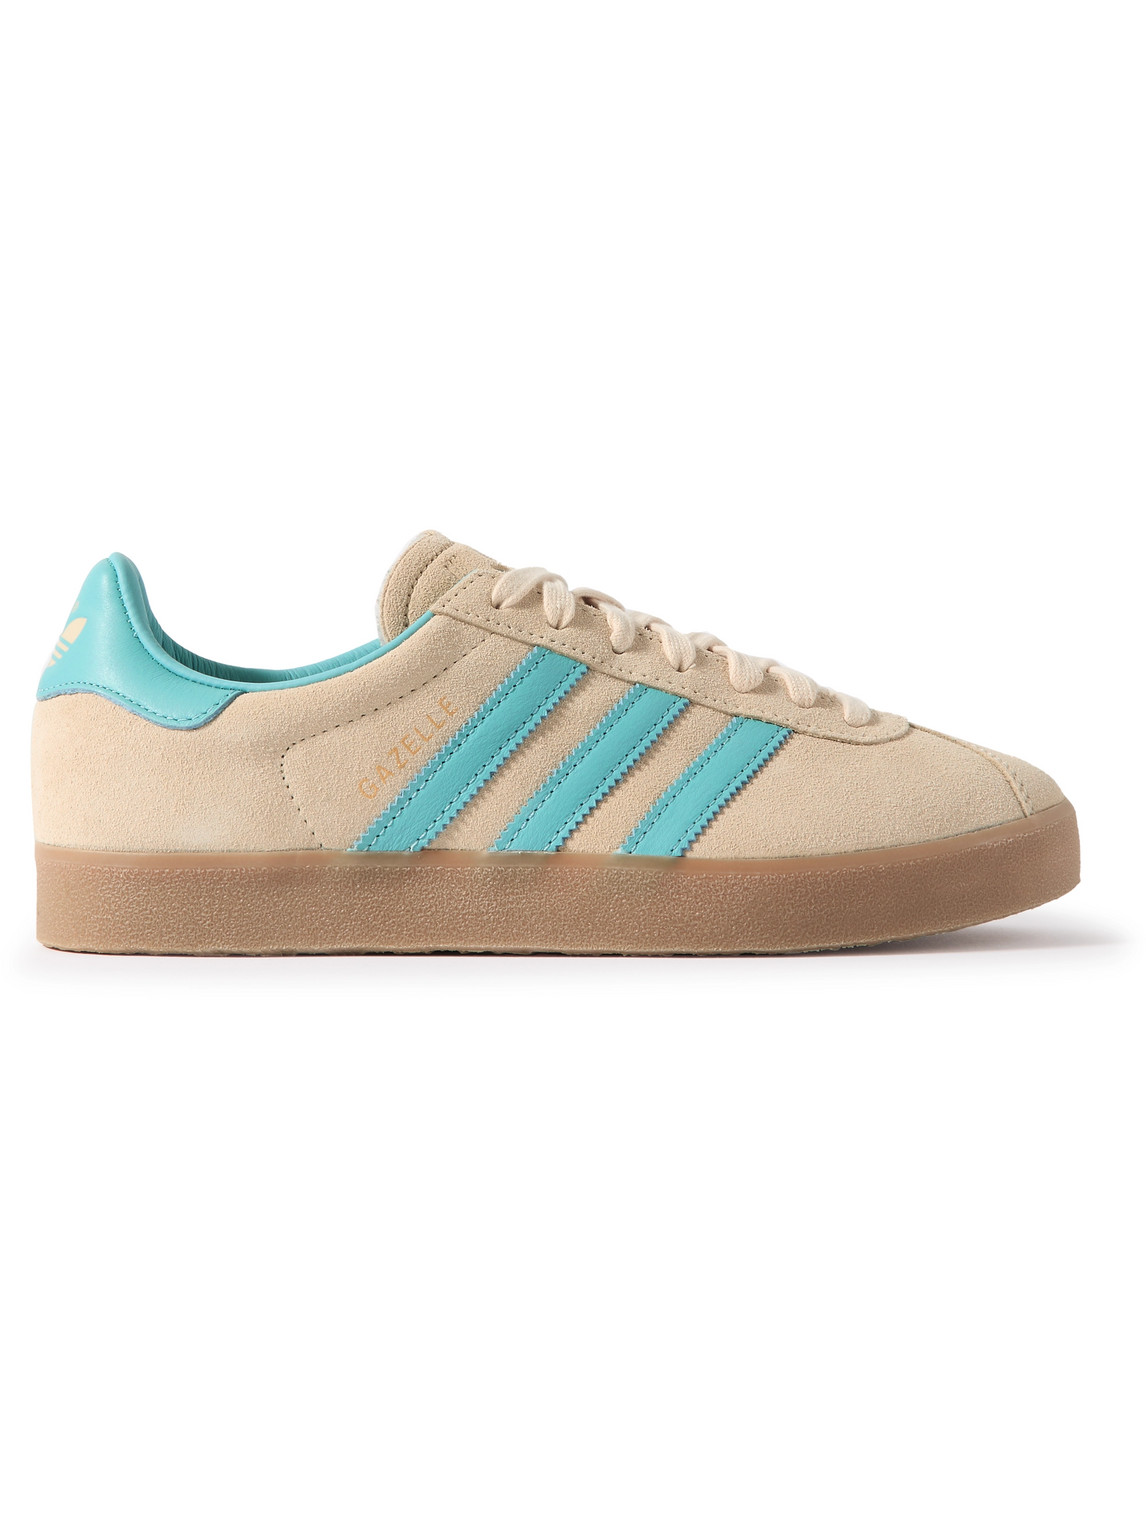 Adidas Originals Gazelle 85 Leather-trimmed Suede Trainers In Neutral